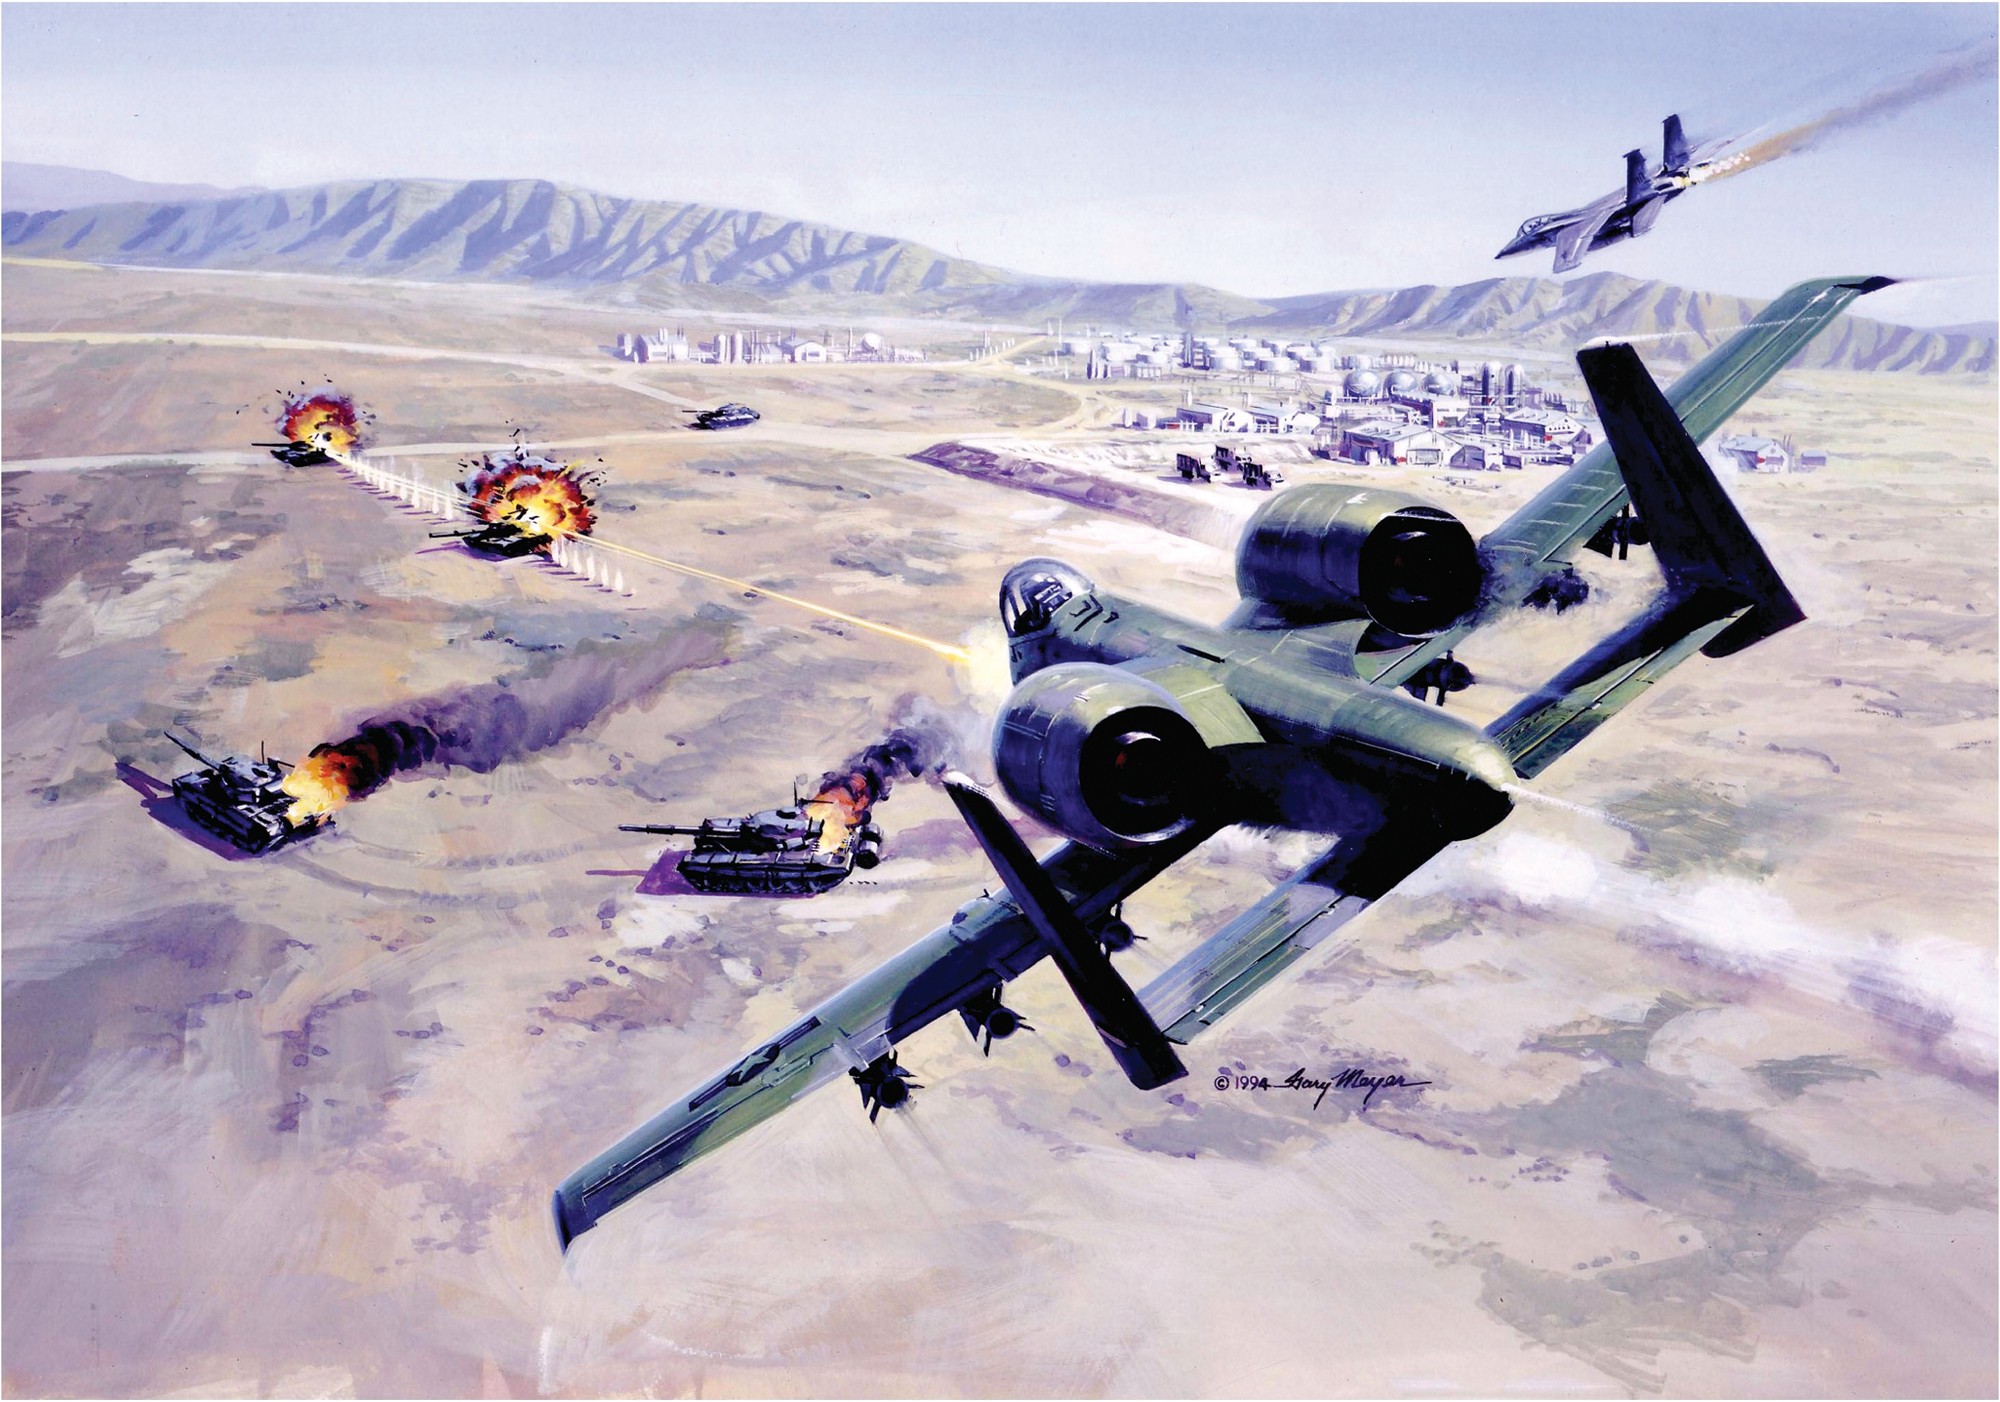 General 2000x1402 aircraft war battle air force artwork tank military vehicle military aircraft explosion landscape 1994 (Year) US Air Force F-15 Eagle Fairchild Republic A-10 Thunderbolt II Tankbuster Attacker jets American aircraft military burning fire